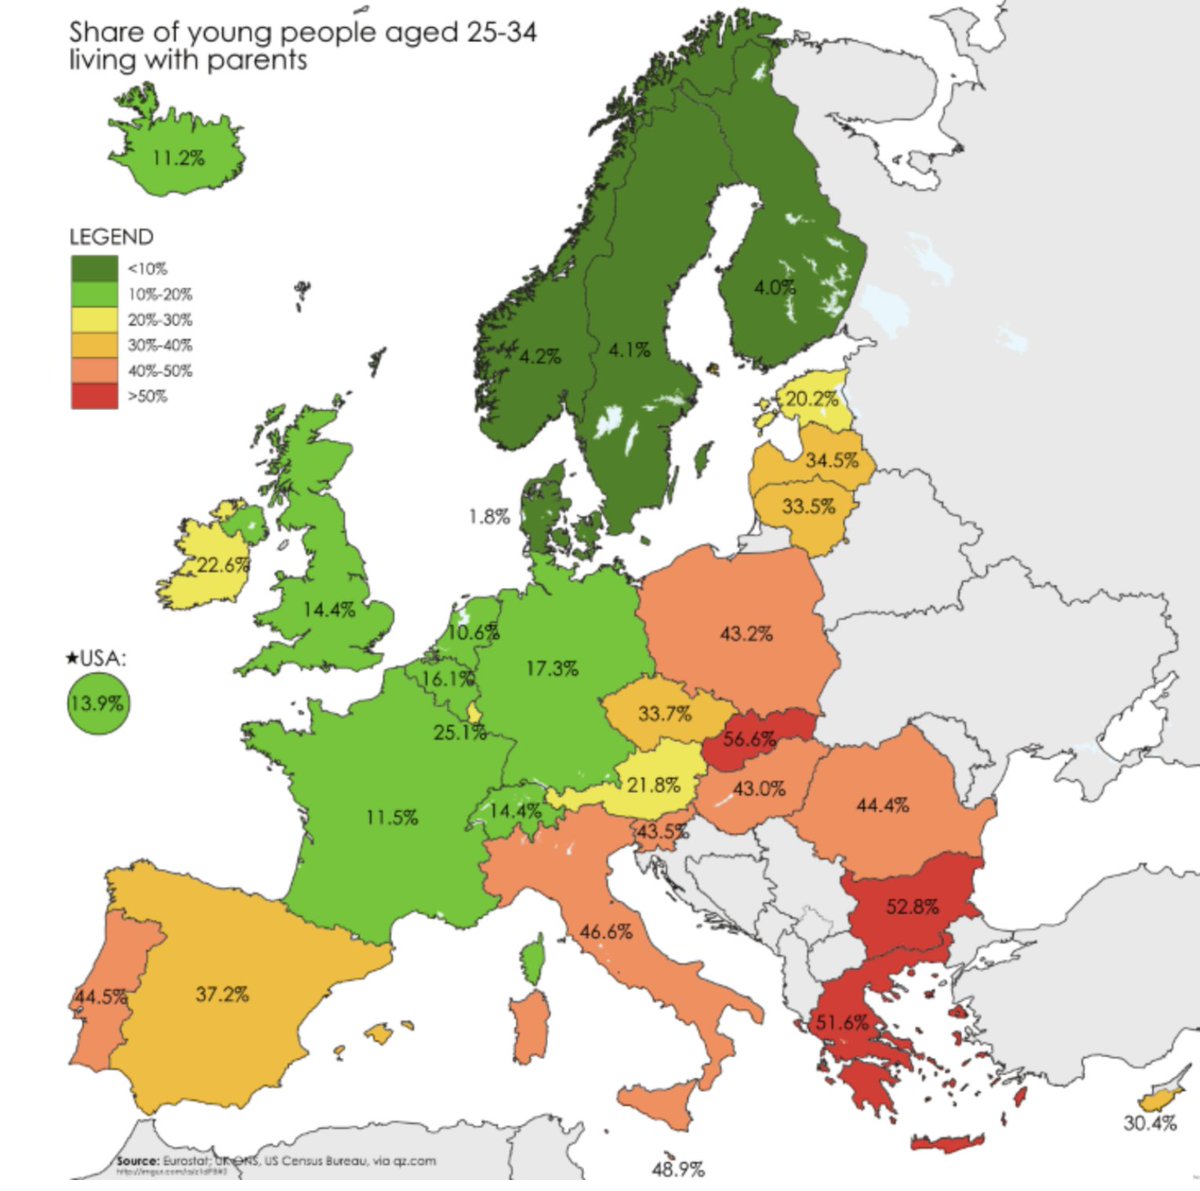 There is a huge range in the rate that young people aged 25 to 34 live with their parents, ranging from 1.8% in Denmark to 56.6% in Slovakia. The US is at 13.9%.
maximumtruth.substack.com/p/sweden-and-c…
@maximlott